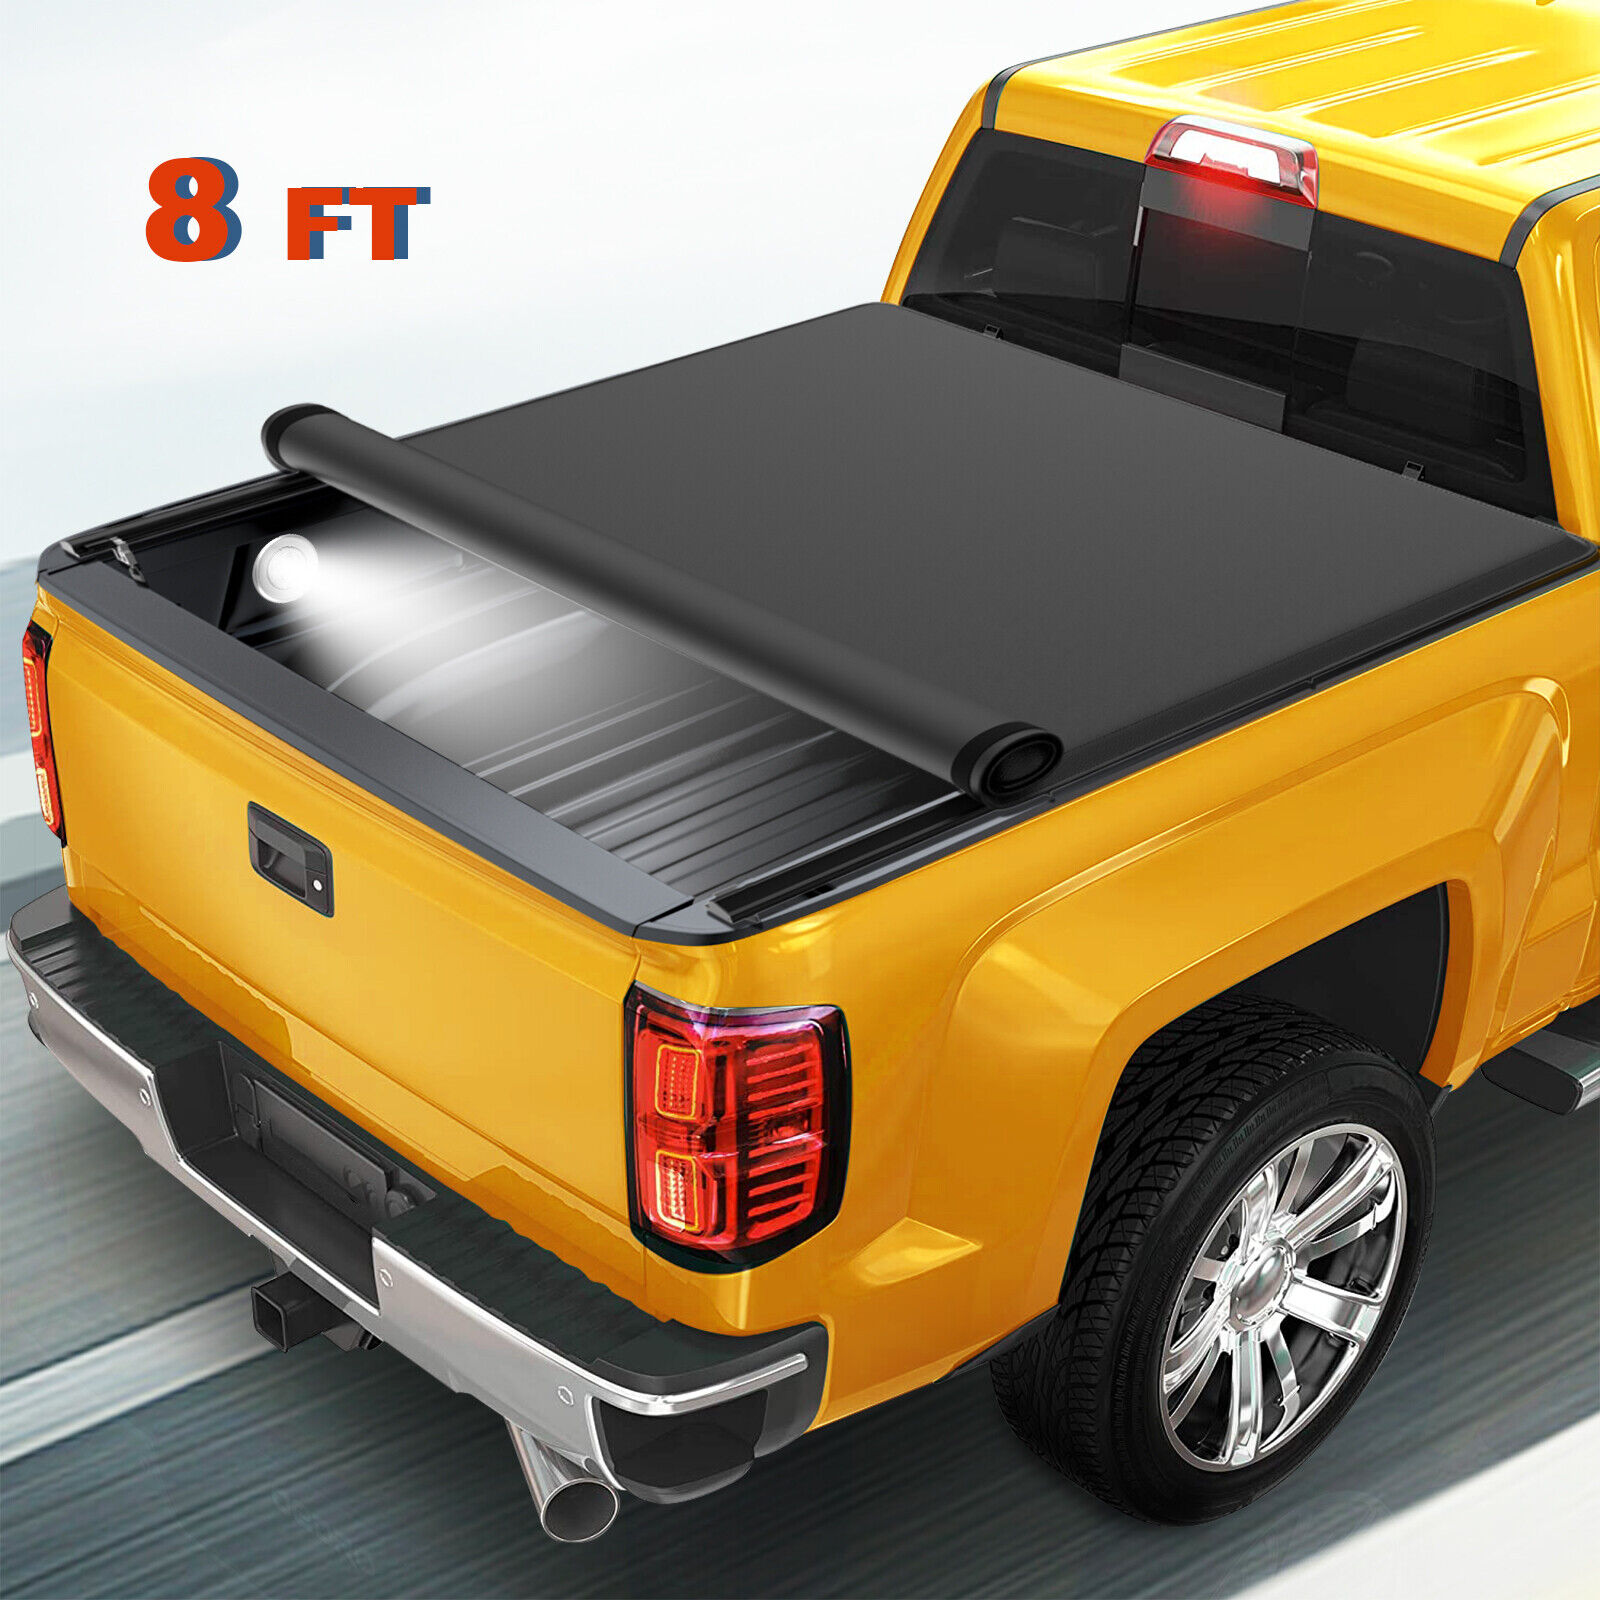 8FT Roll-Up Tonneau Cover For 1999-16 Ford F250 350 450 550 Super Duty Truck Bed